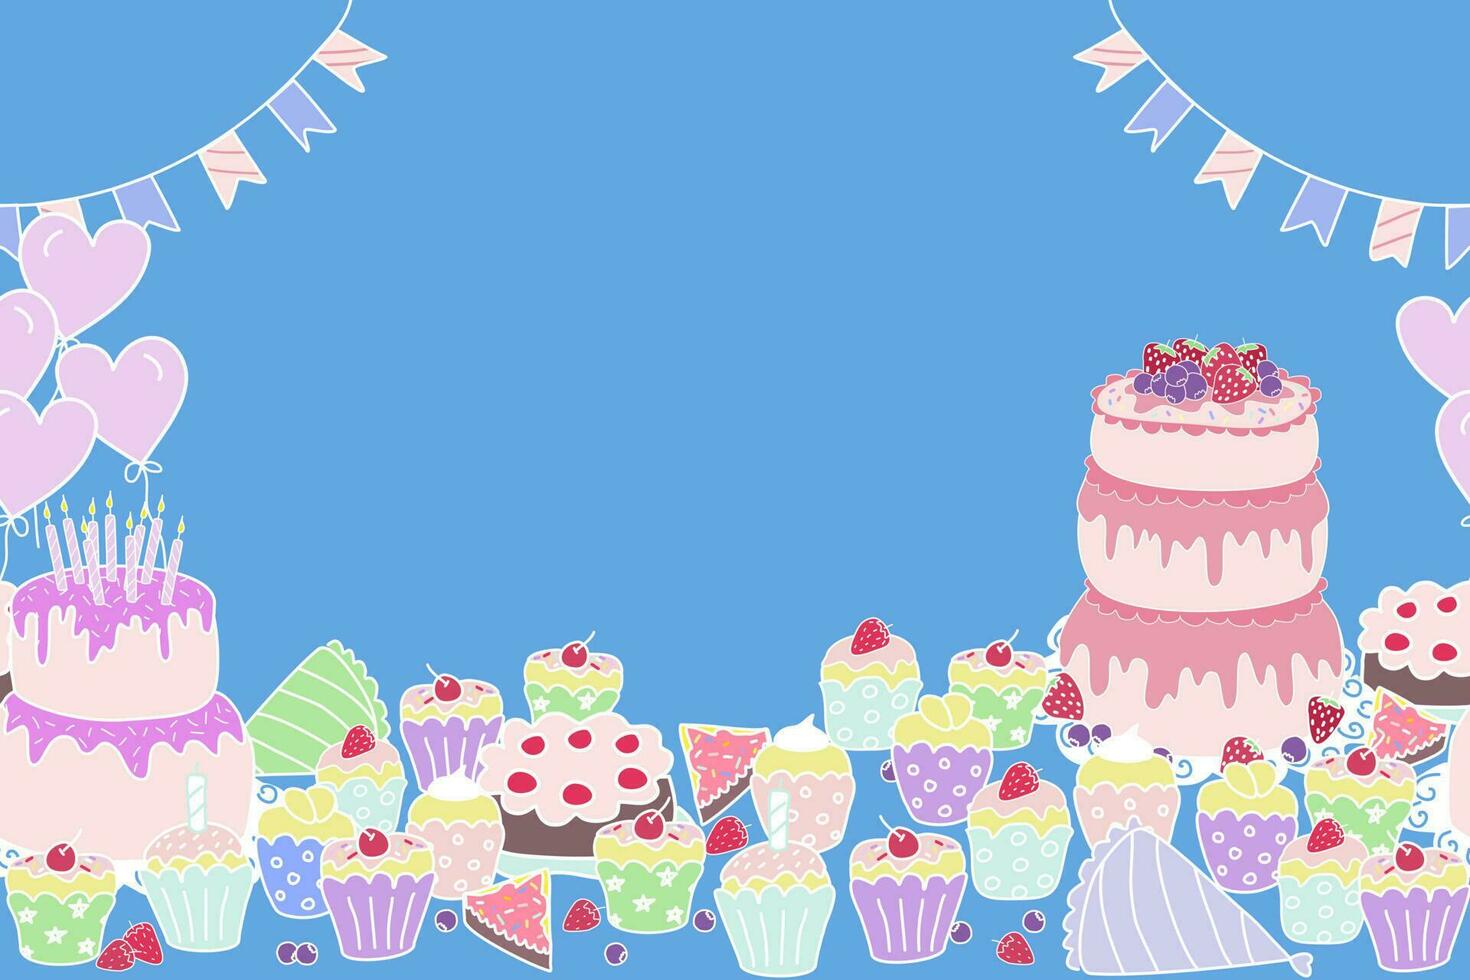 Happy Birthday cake party invitation background banner doodle vector illustration seamless. Celebration with cake balloons hat snack garland decoration. Copy space. Freehand drawing. For kid party.